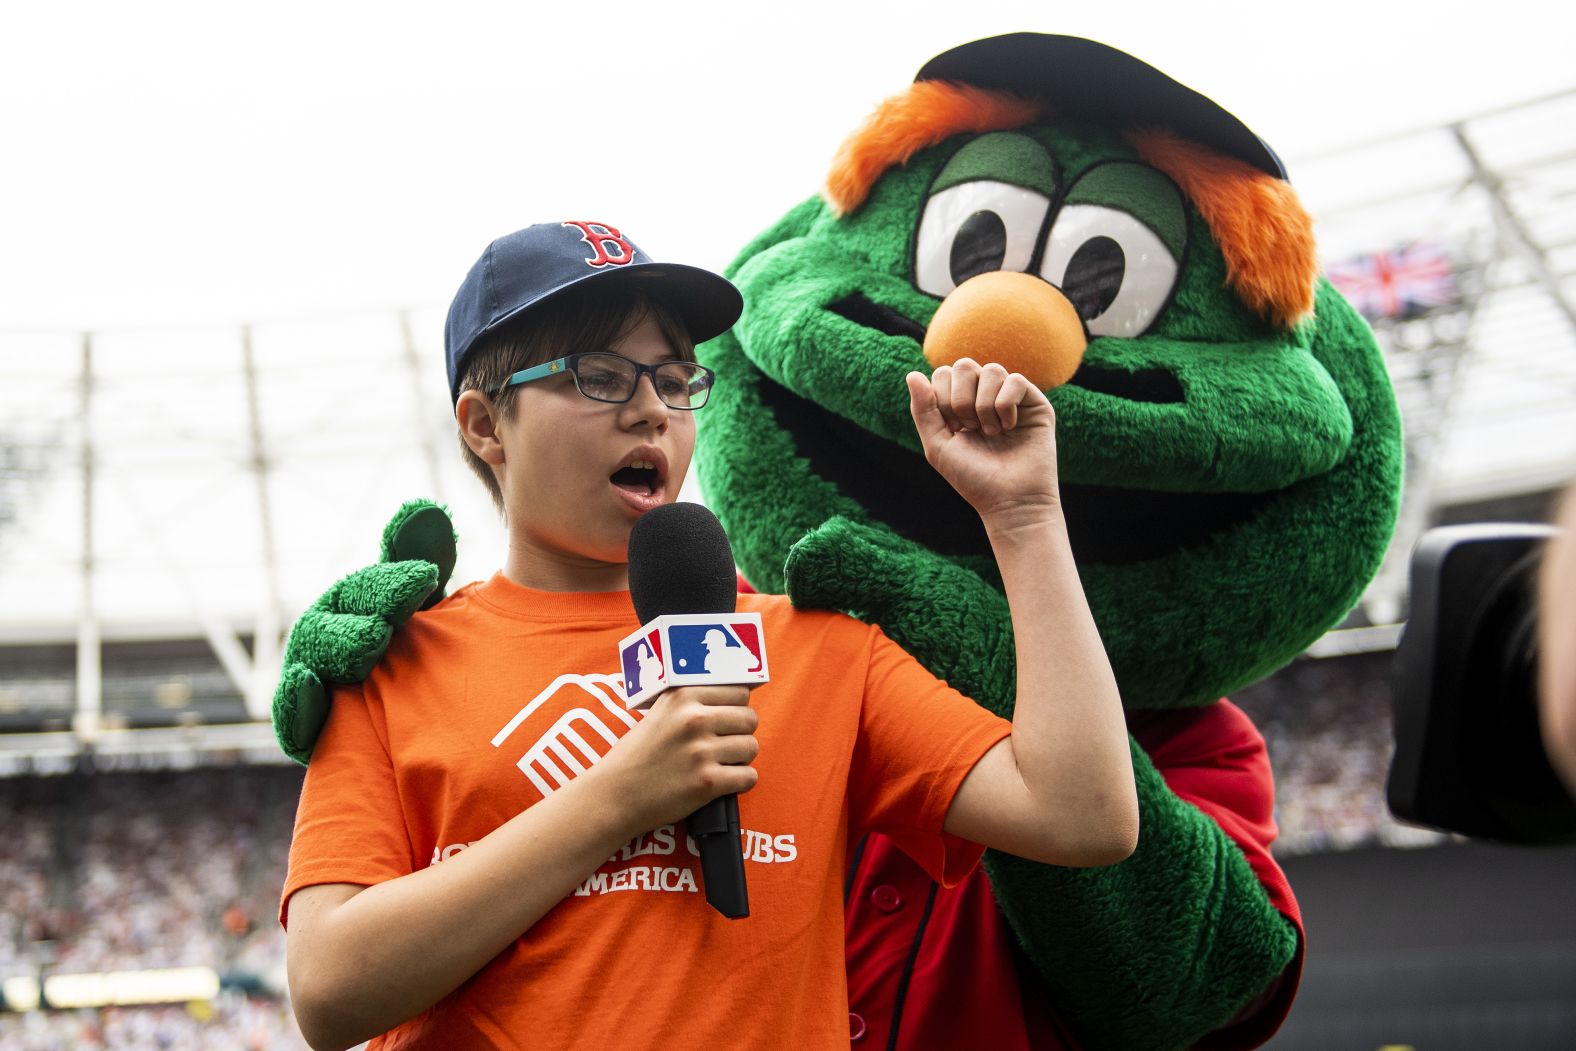 Red Sox mascot Wally participates in a "Play Ball" ceremony on June 30.